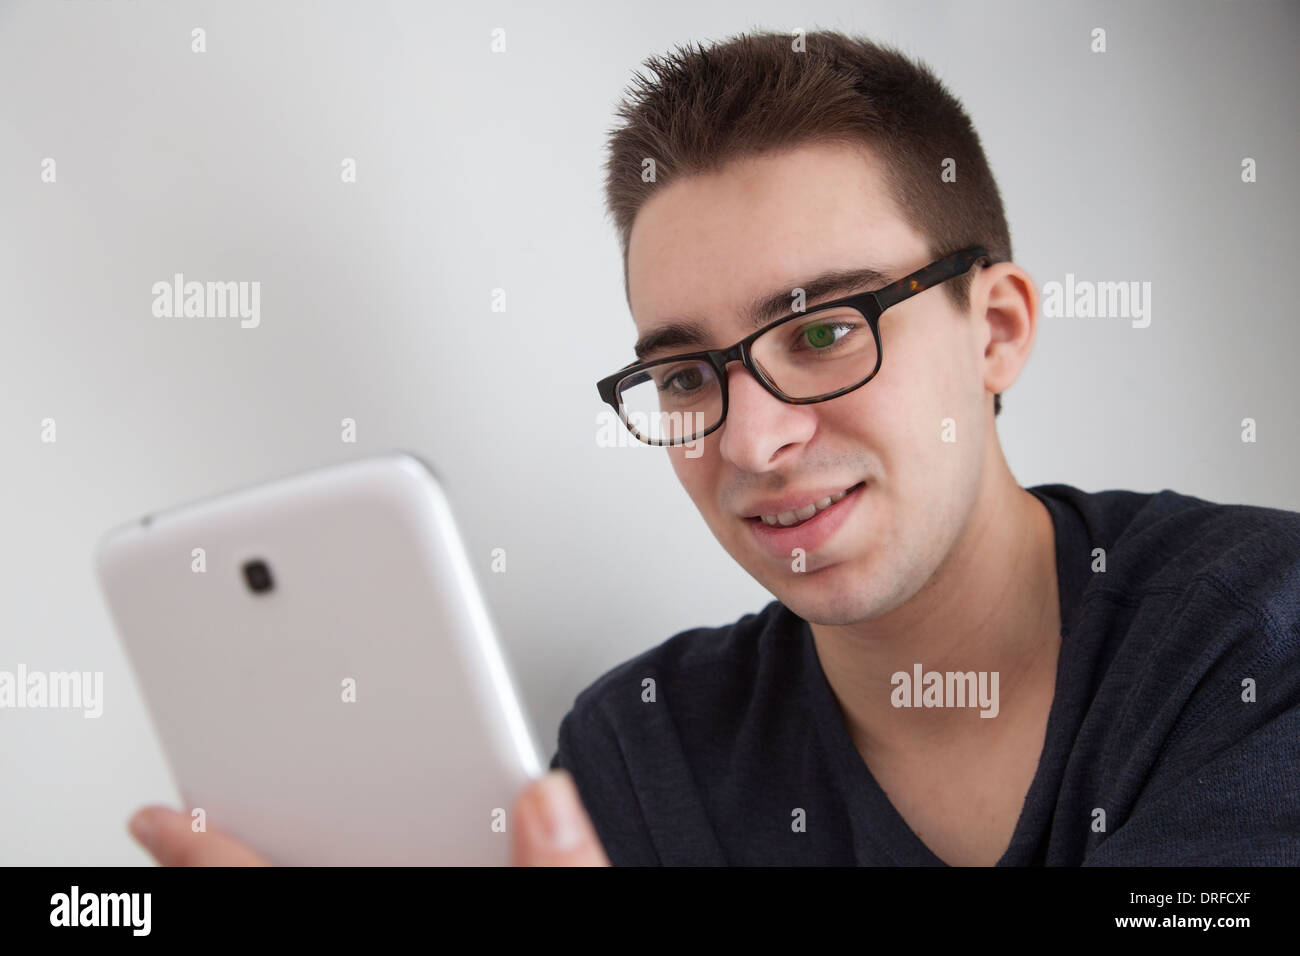 Good looking young man wearing glasses, holding a white digital tablet. Small copy space. Stock Photo